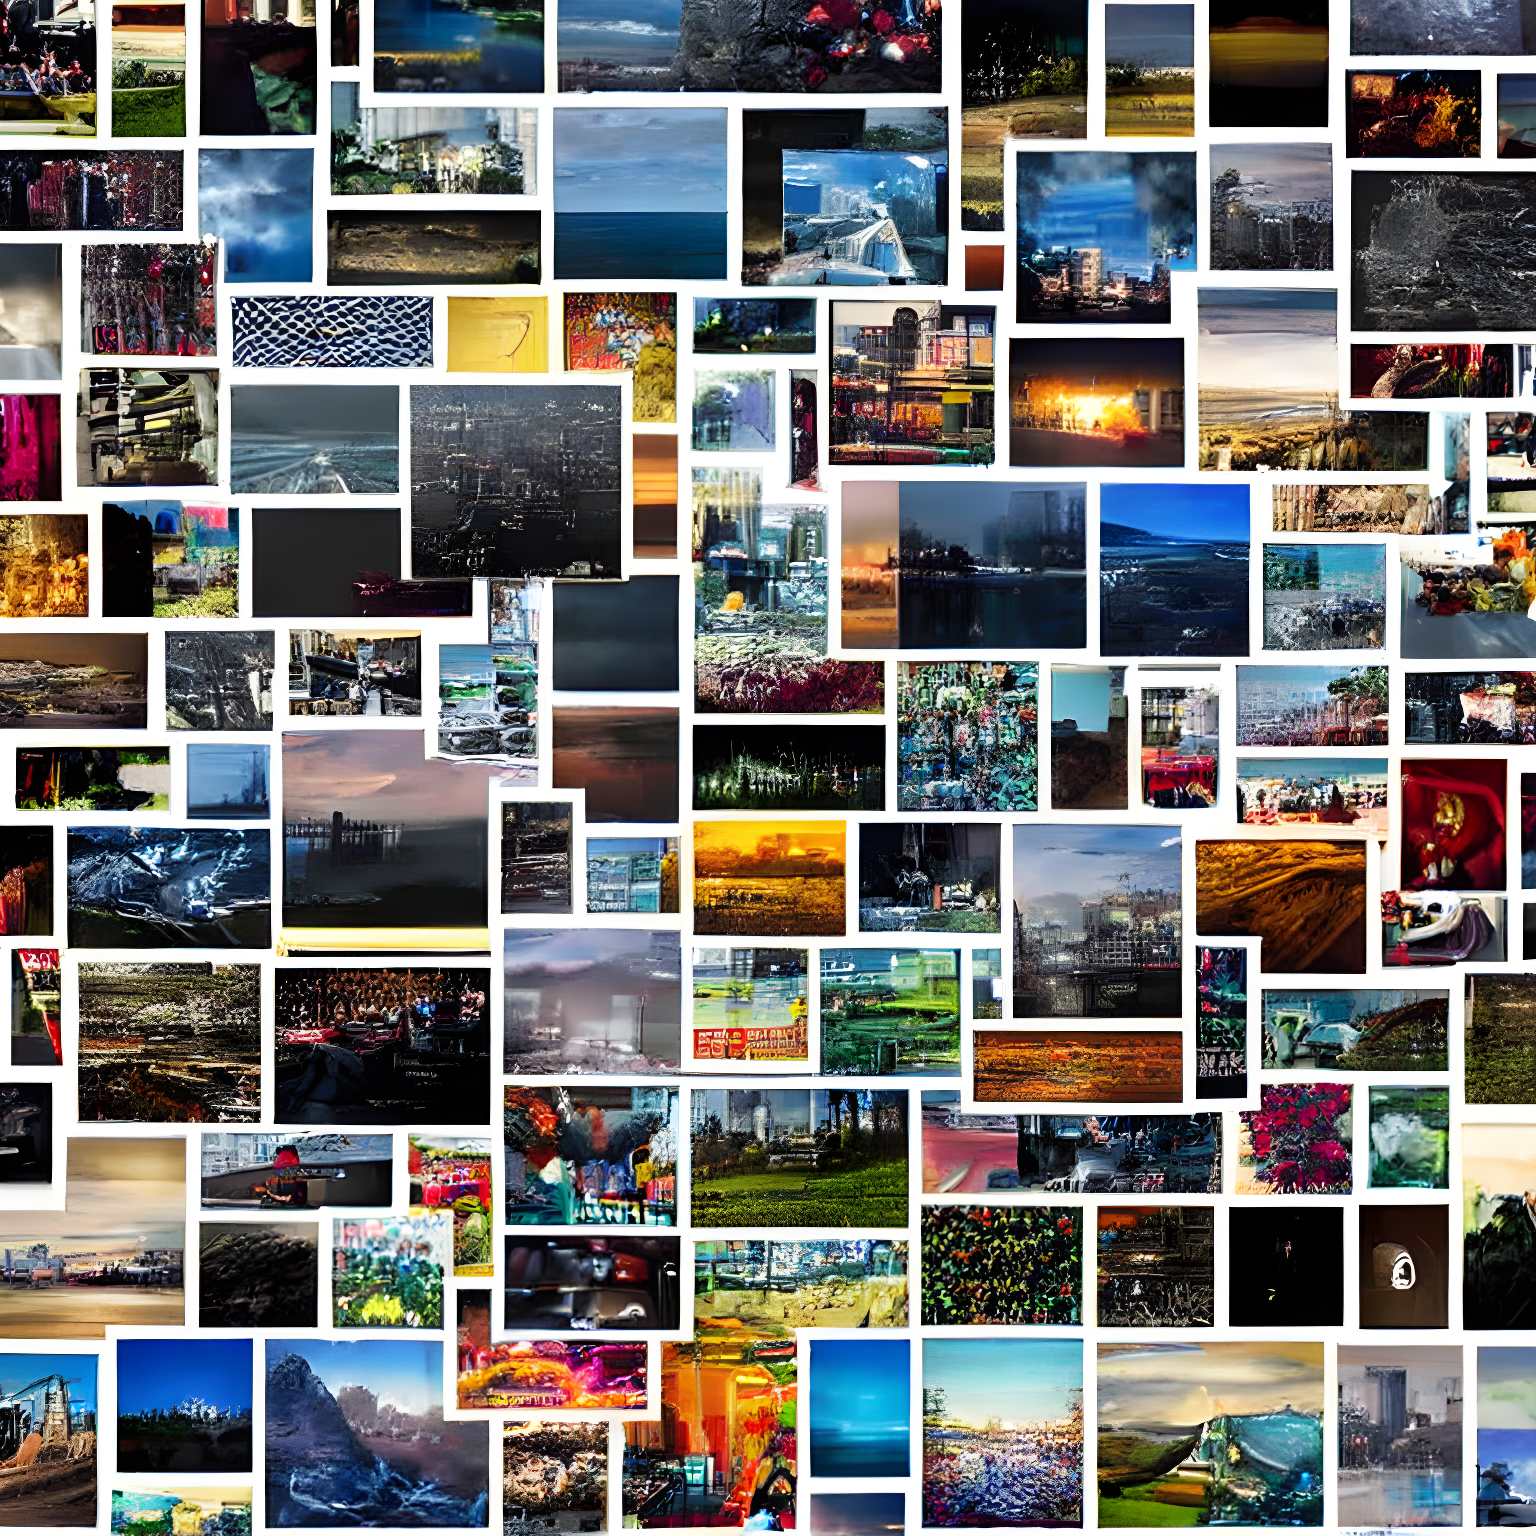 thousands of images organized together in small frames